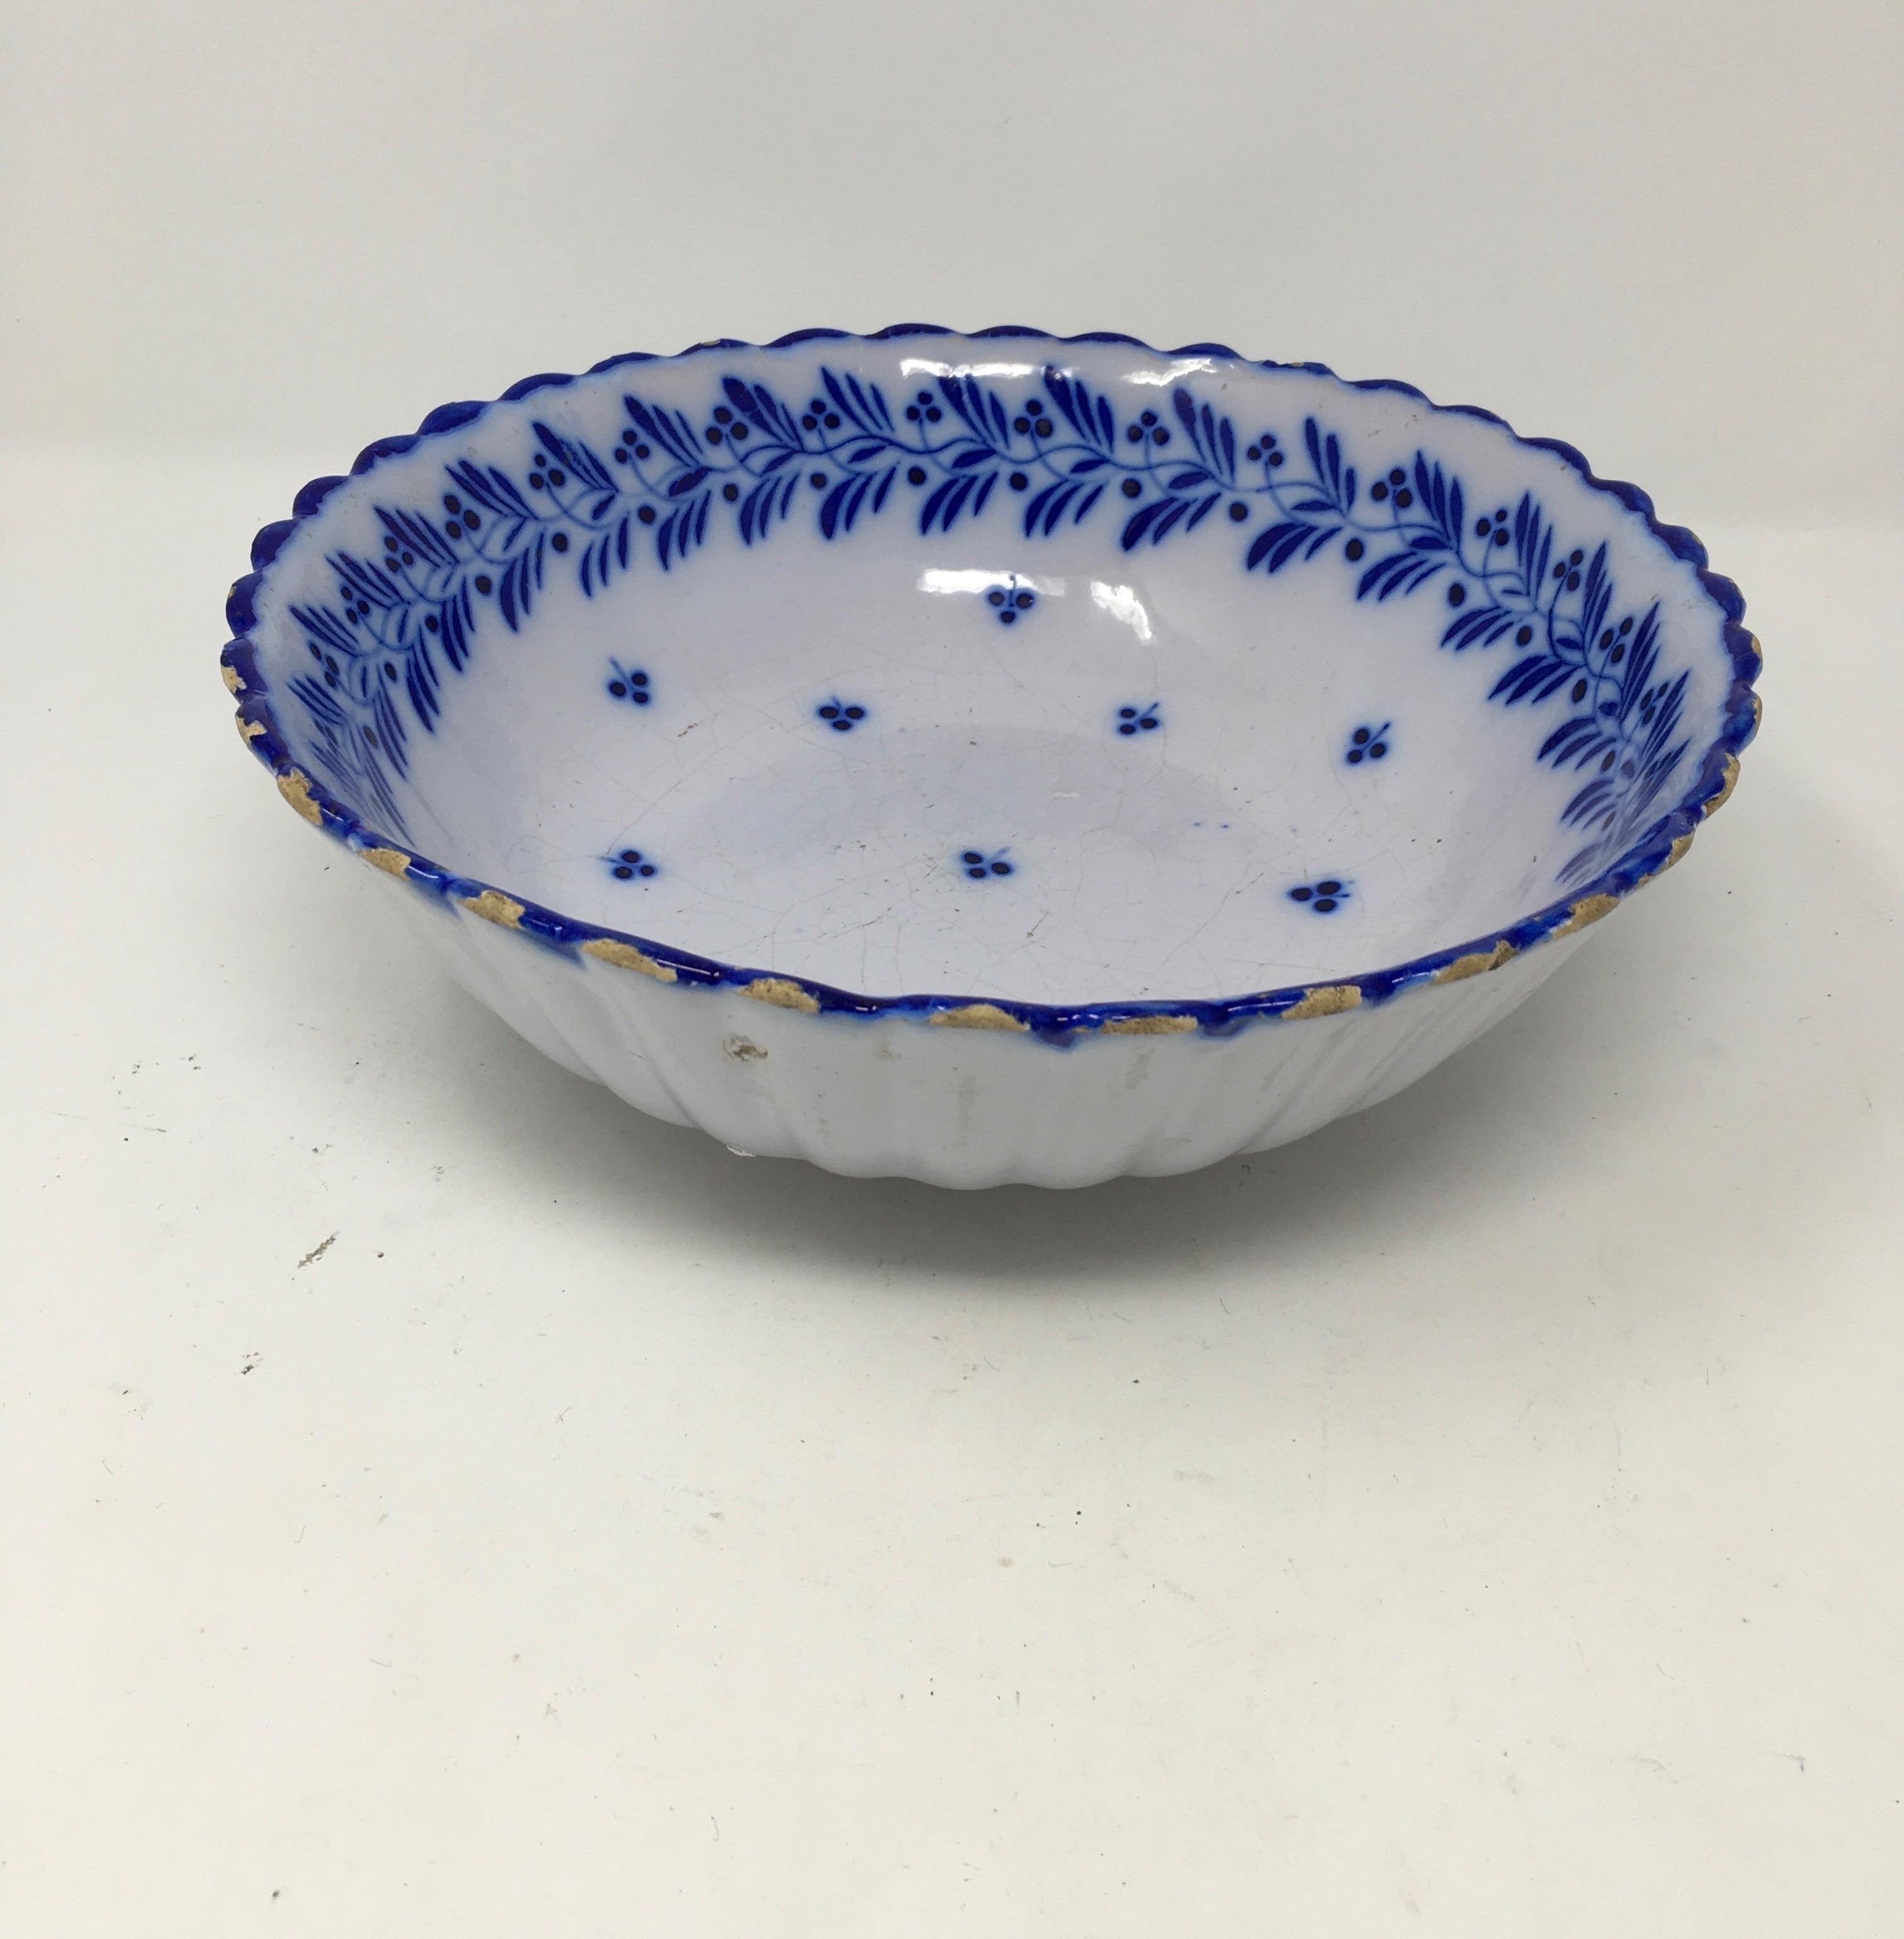 This cheerful blue and white painted bowl has a small scalloped rim. It is finished on the interior edge with a leaf and berry design. Its vivid blue color makes it a lovely display piece or a must have for blue and white collectors. There is a